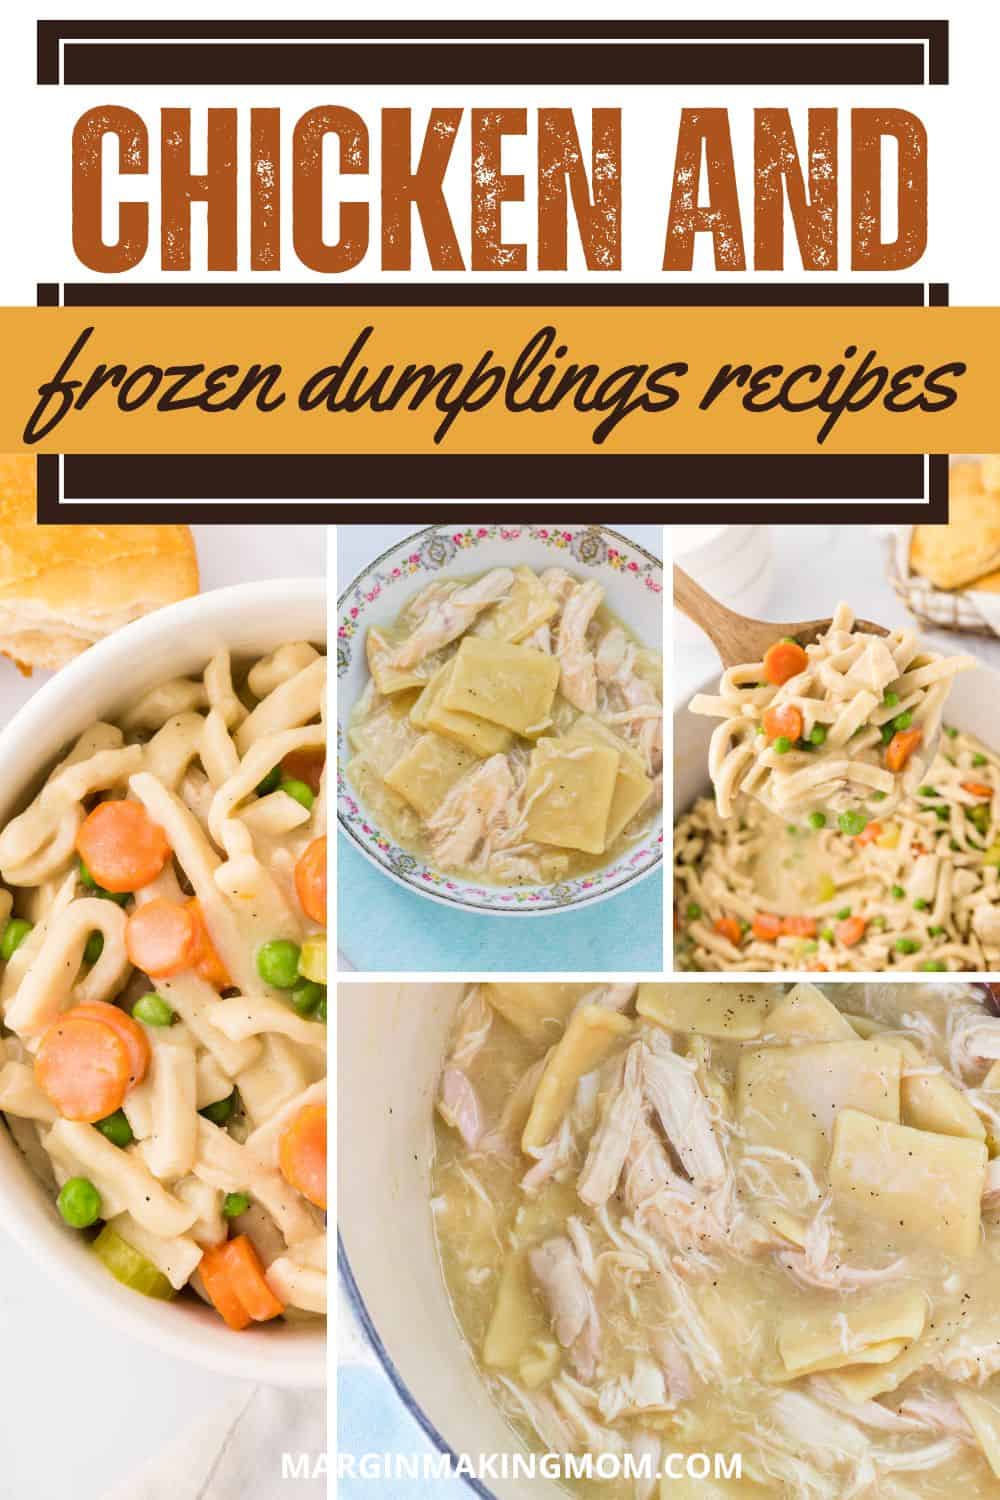 collage image featuring photos of different recipes for chicken and dumplings made with frozen noodles or frozen dumplings